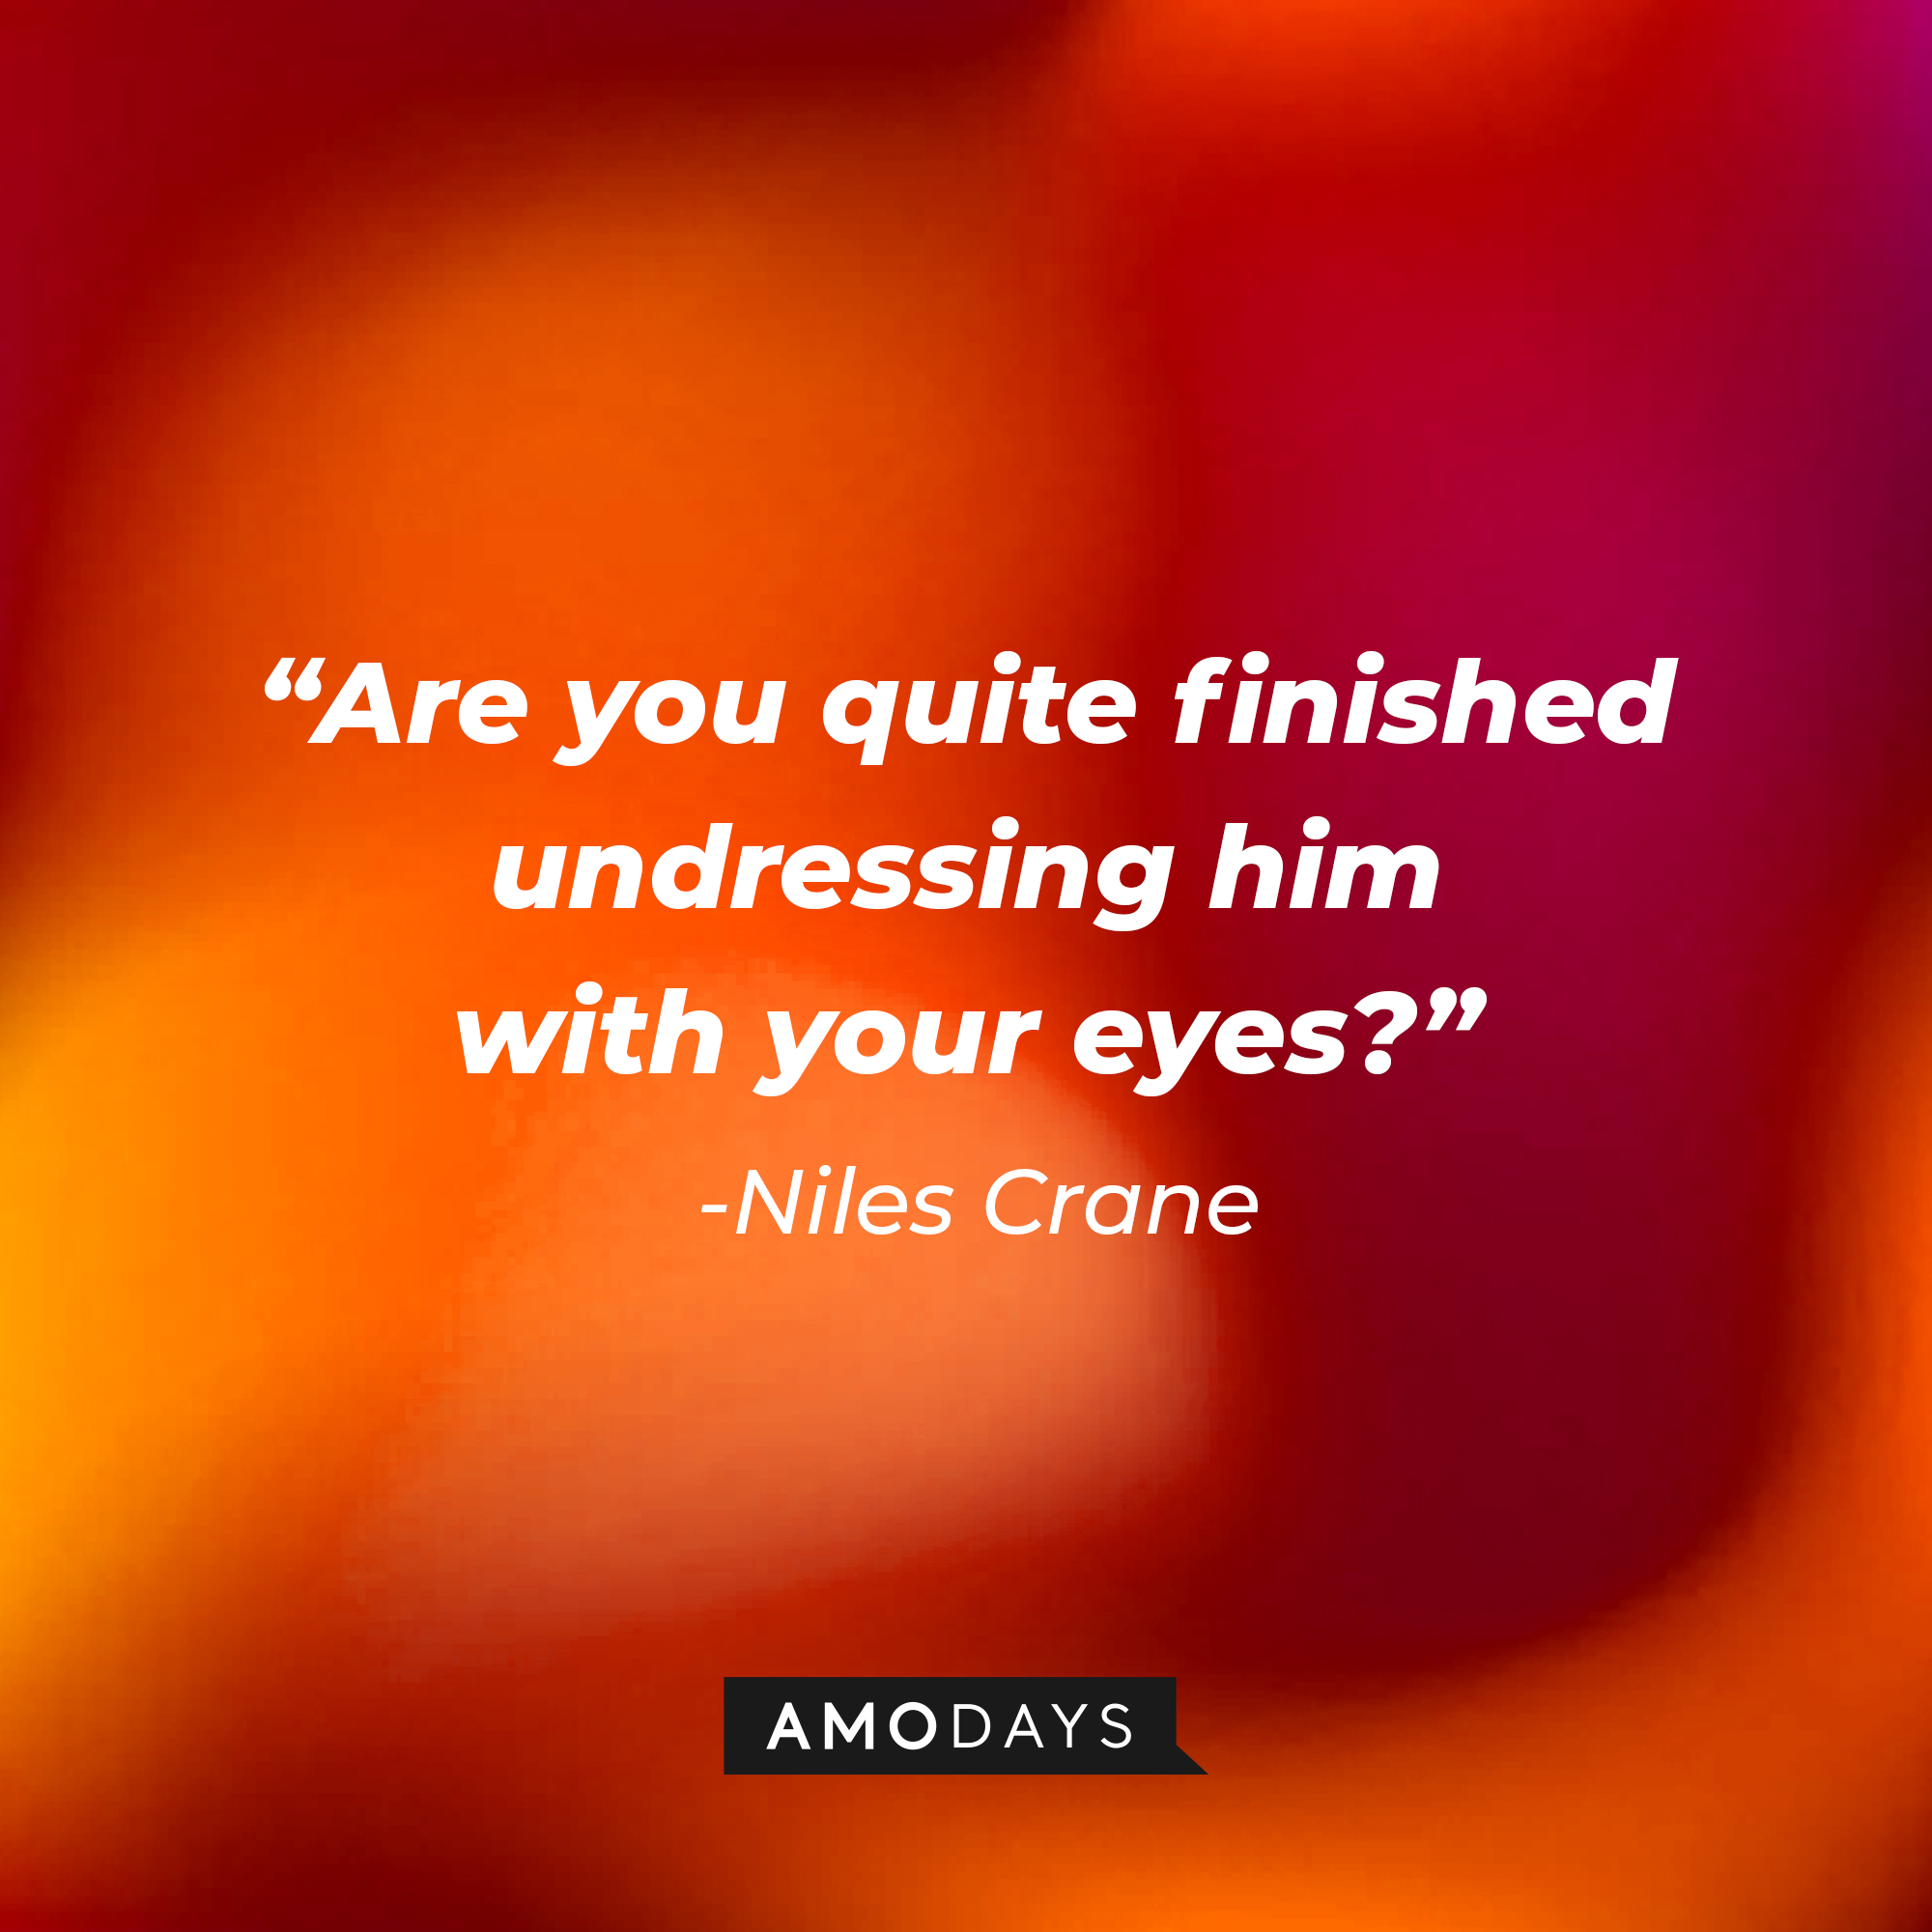 Niles Crane’s quote: “Are you quite finished undressing him with your eyes? | Source: AmoDays